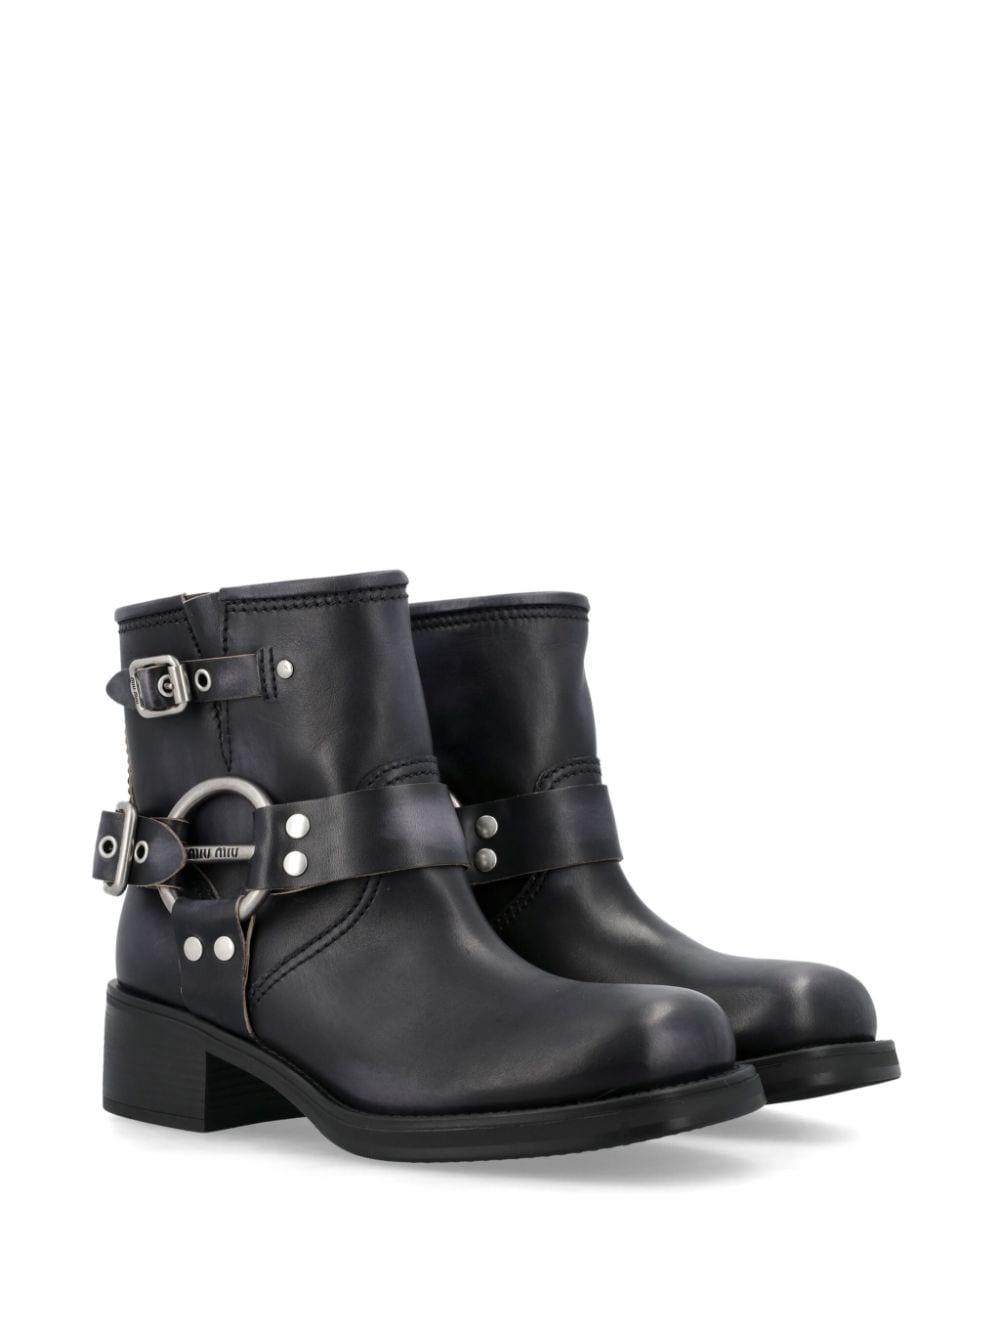 Miu Miu buckled leather ankle boots - Zwart